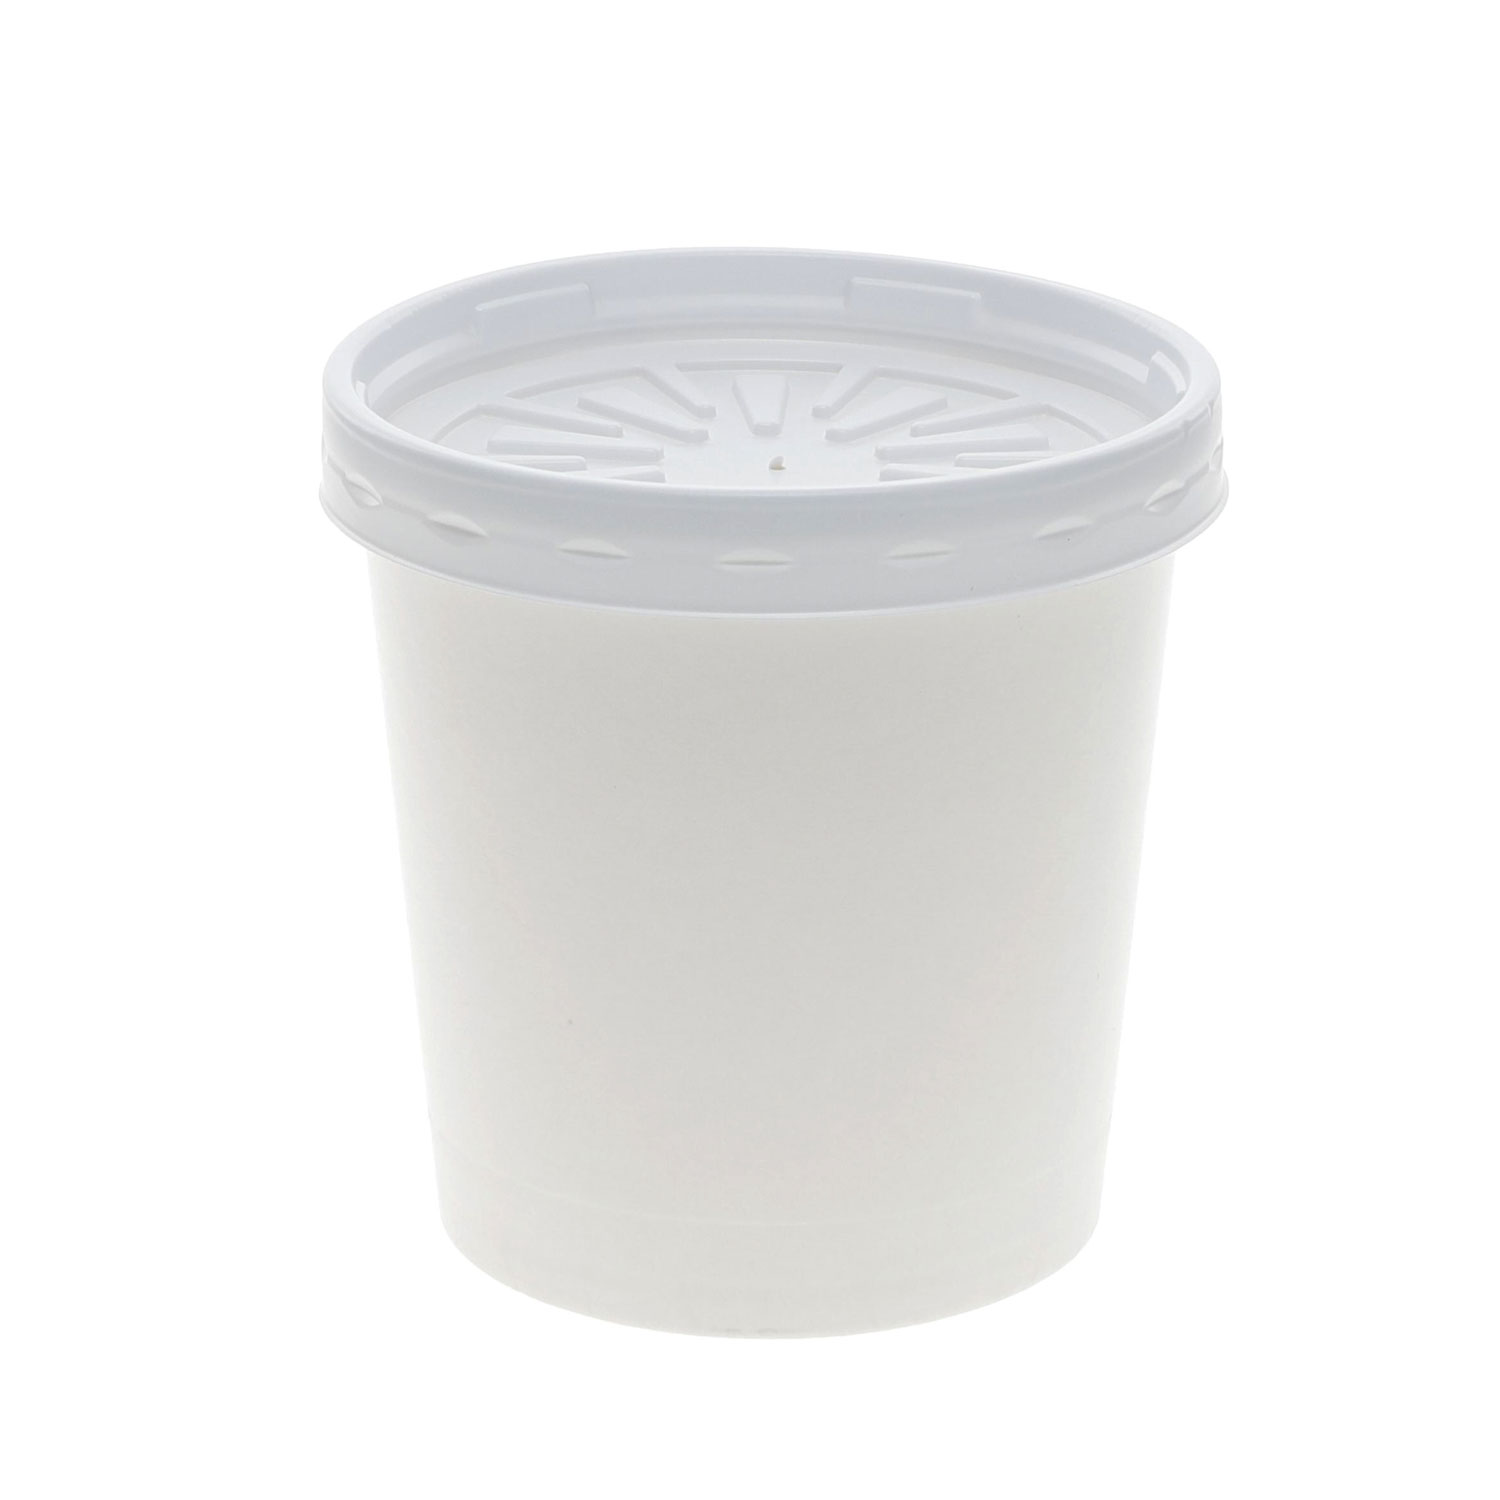 Pactiv Paper Round Food Container and Lid Combo, 16 oz, 3.75 Diameter x 3.88h, White, 250/Carton